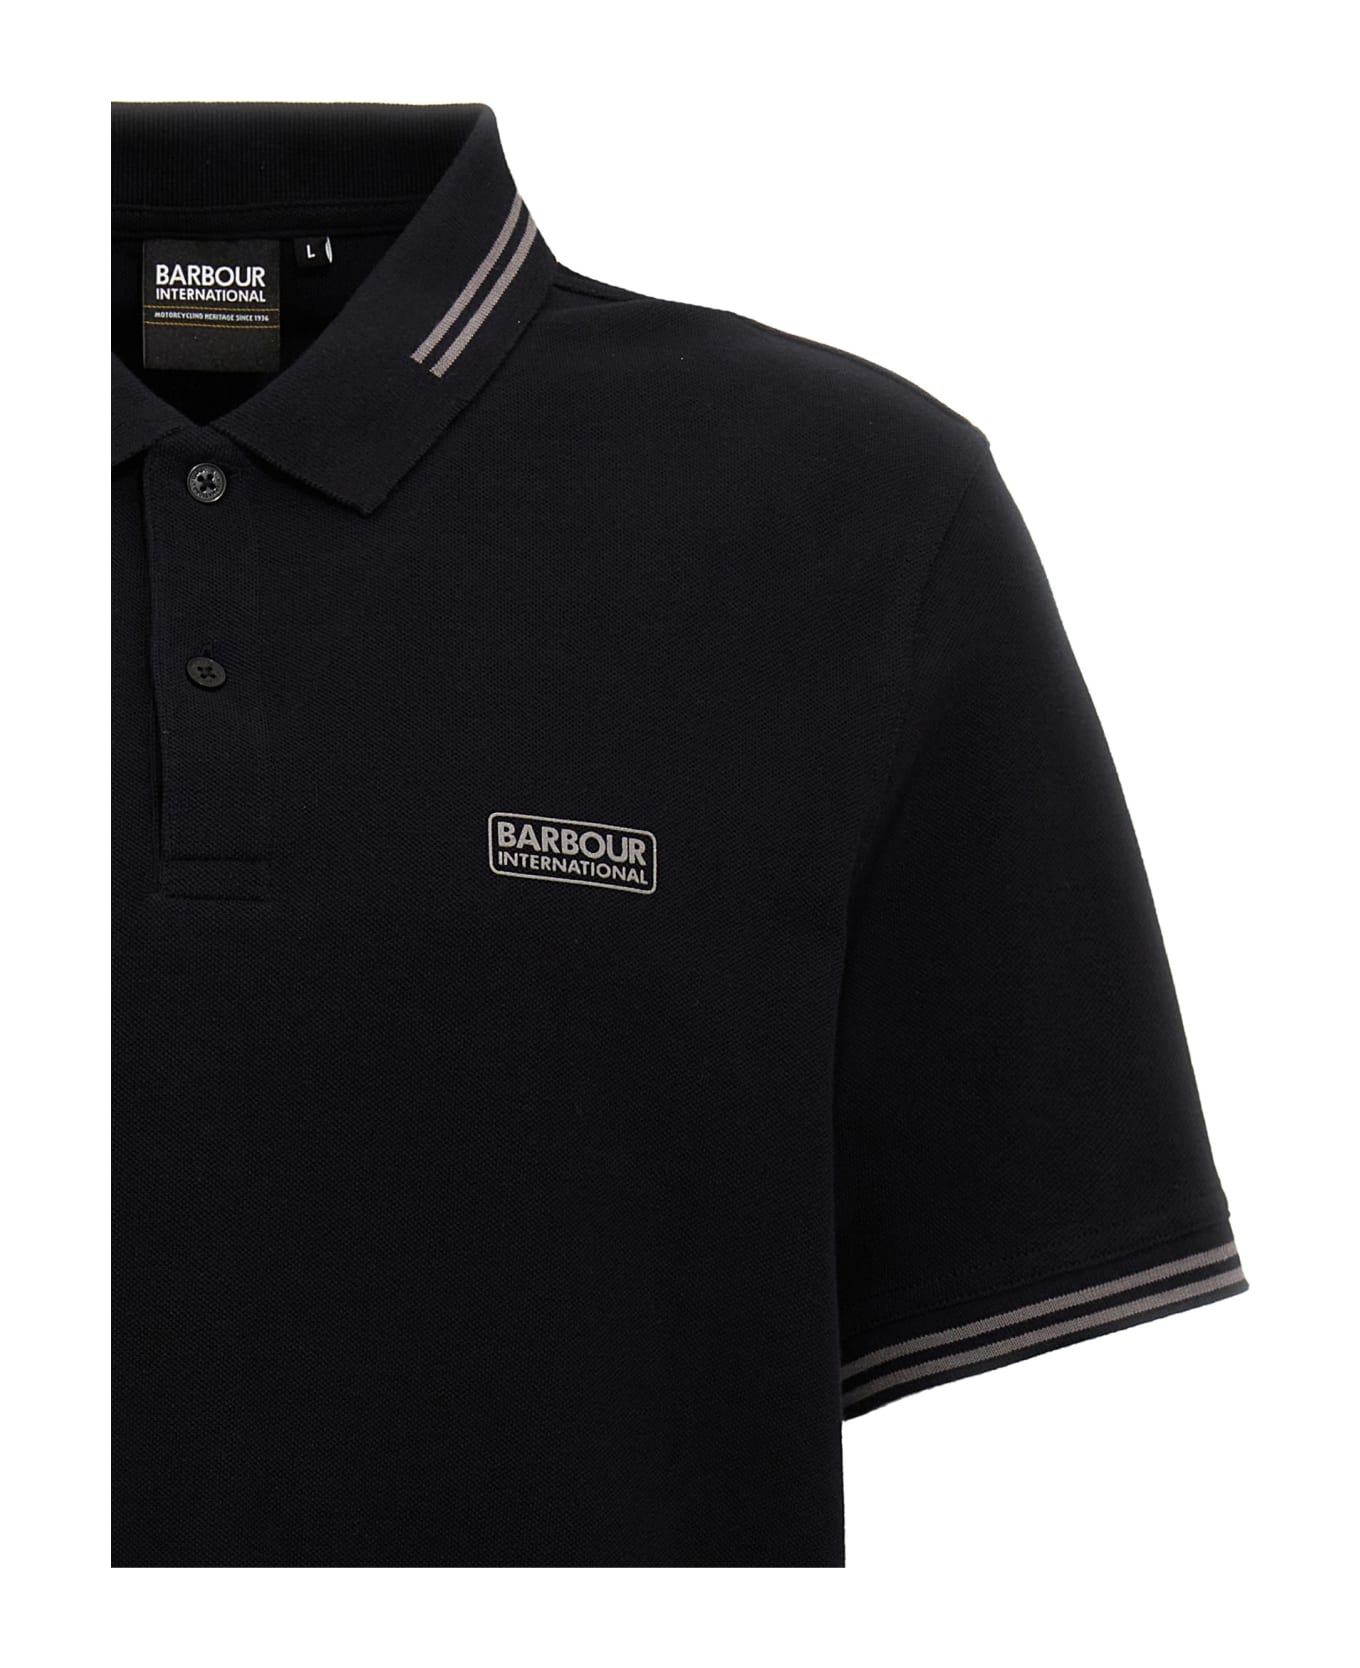 Barbour 'essential Tipped' Polo Shirt - Black  